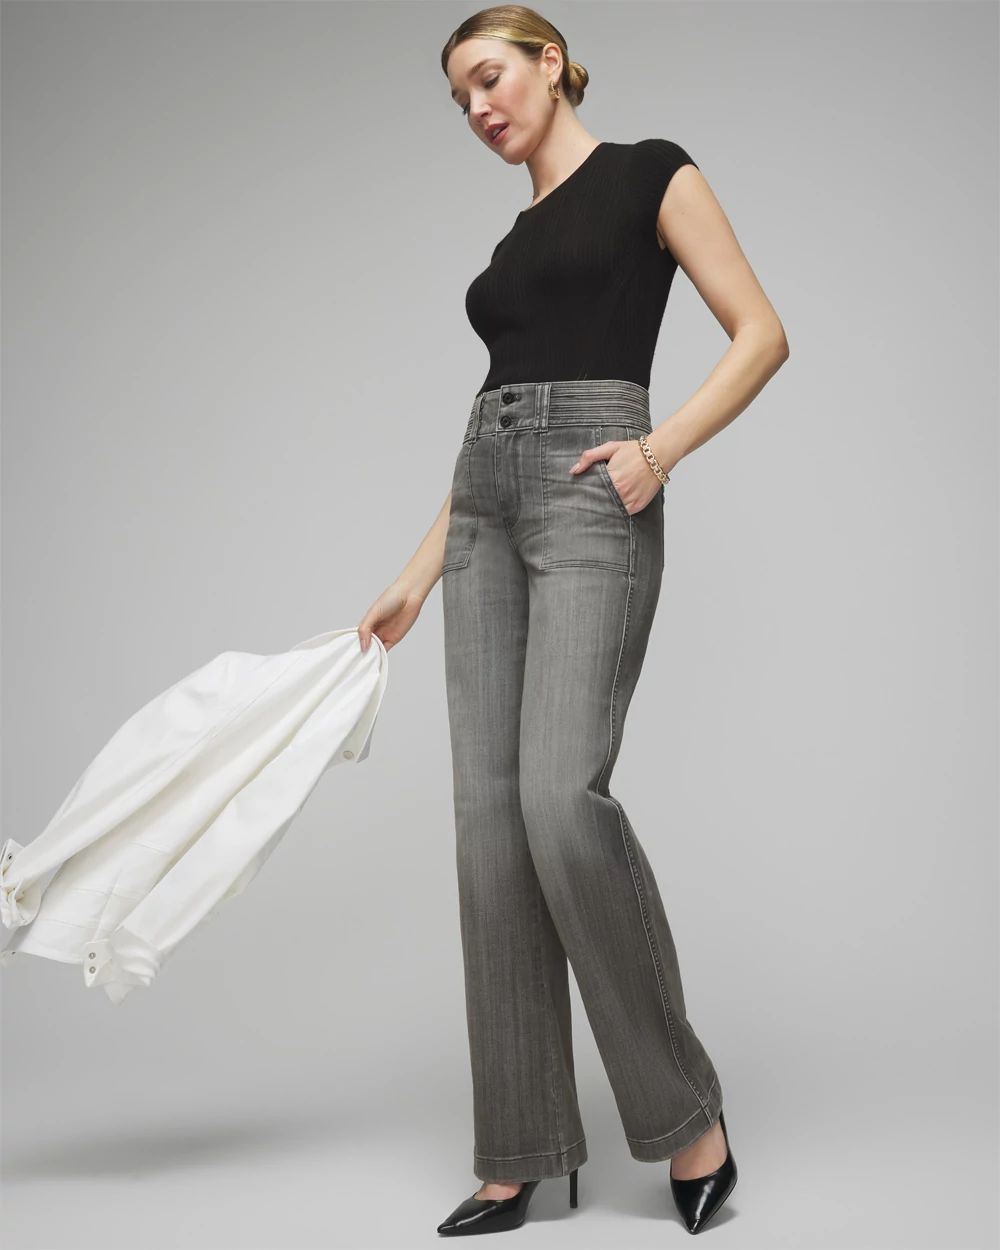 Extra High-Rise Everyday Soft Novelty Waistband Trouser click to view larger image.